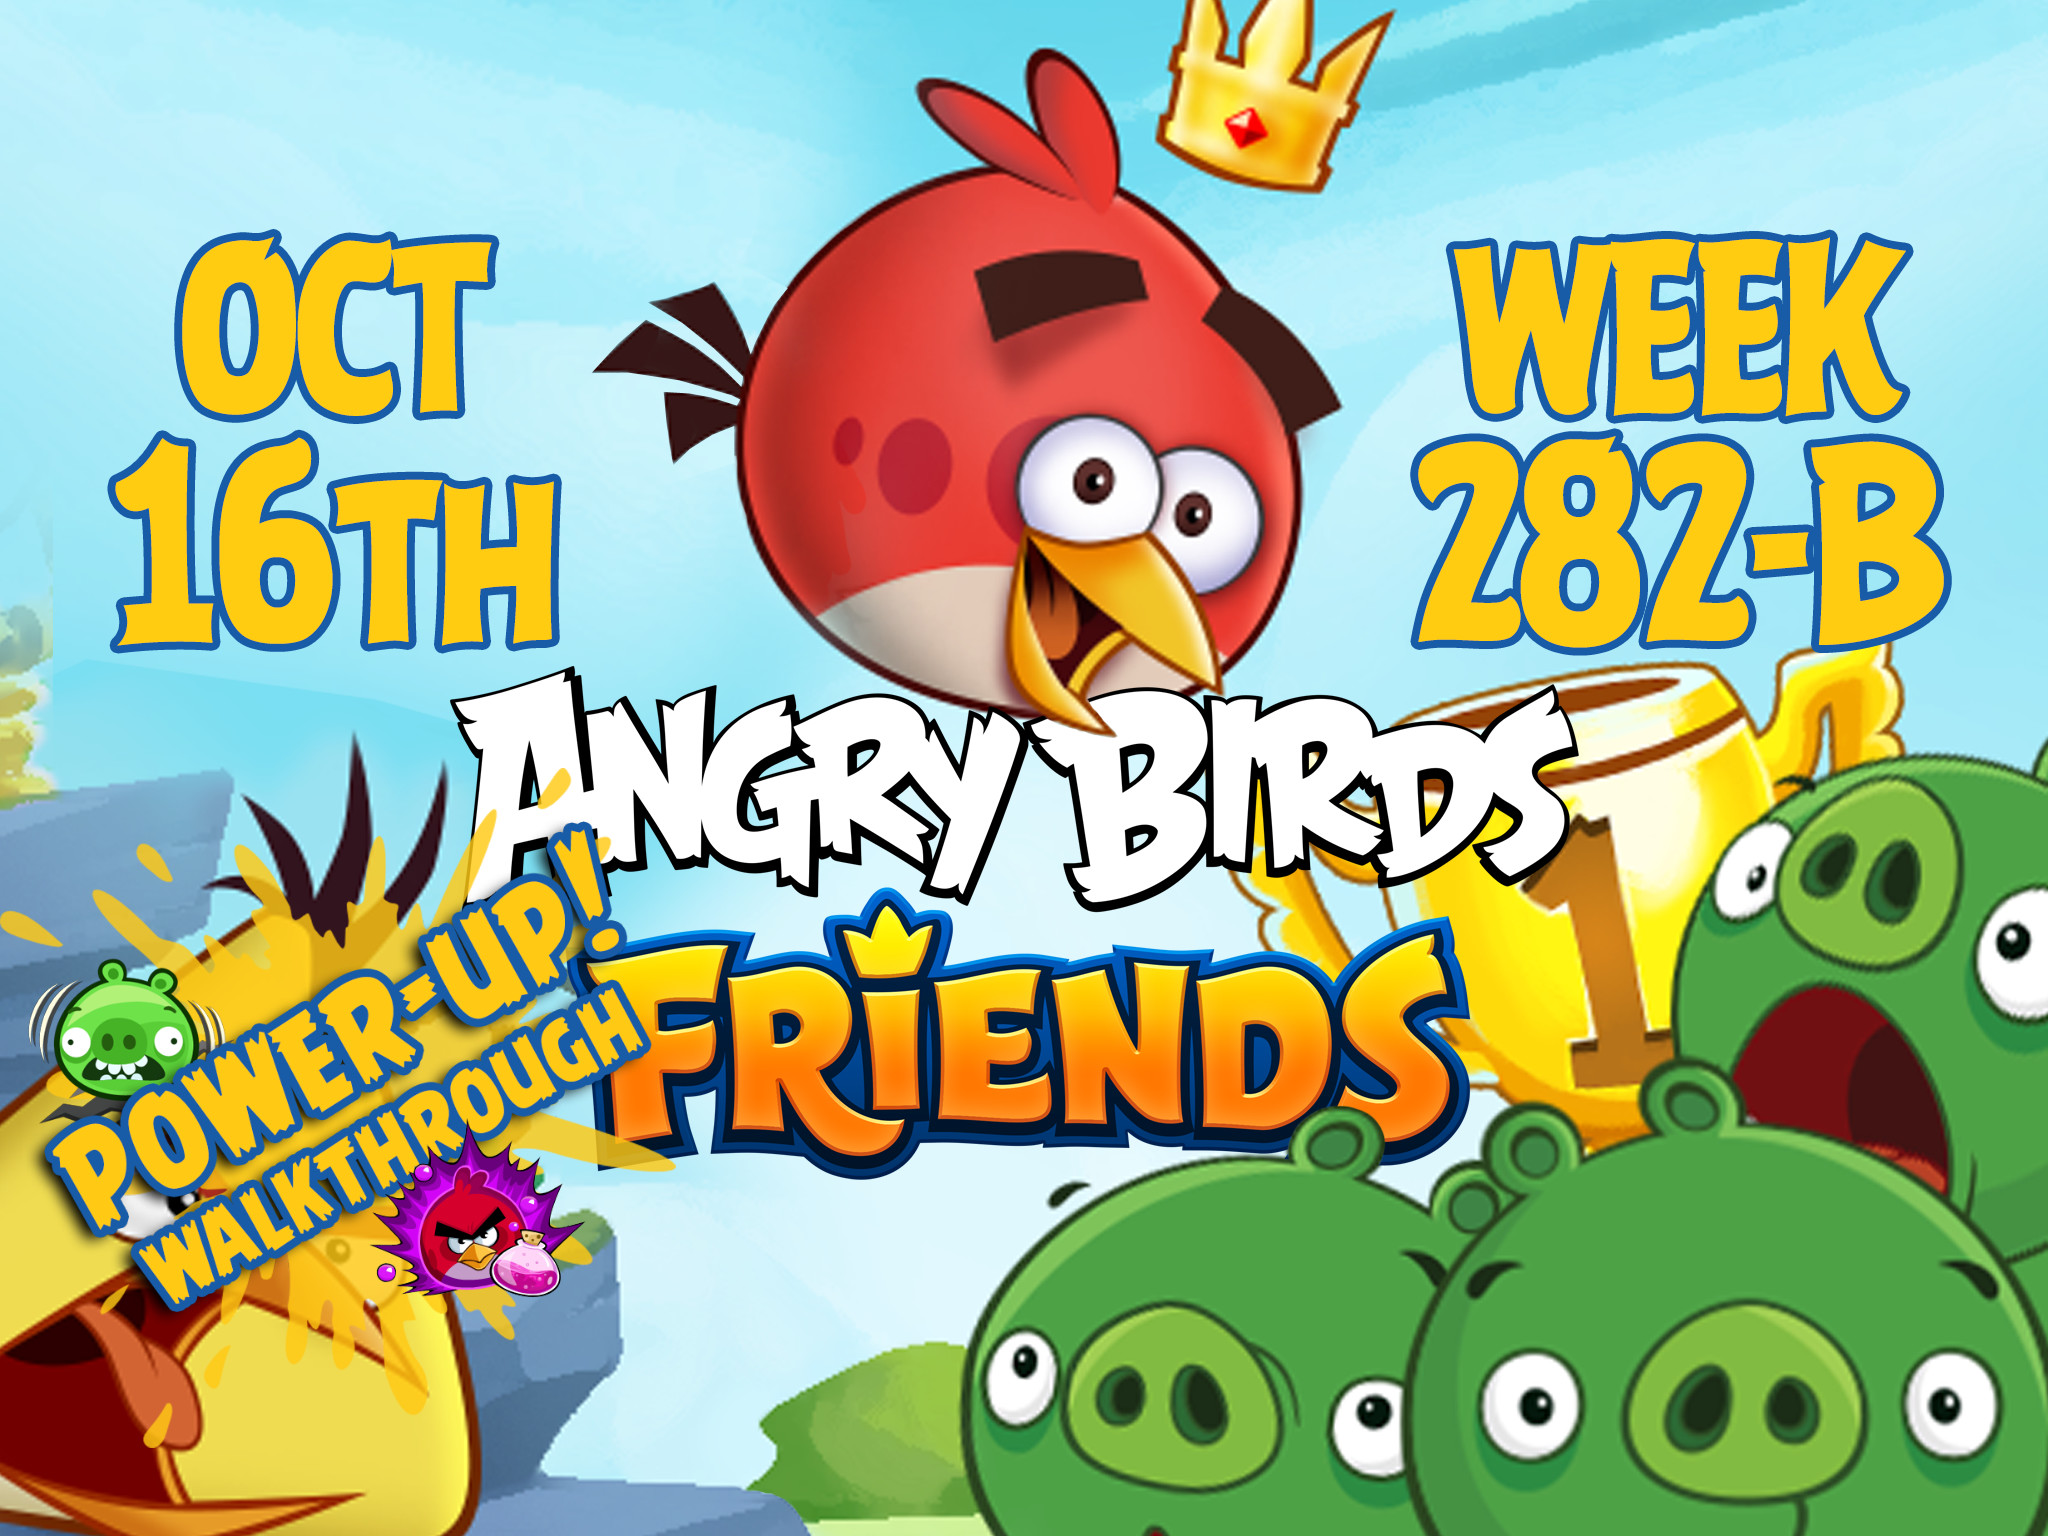 Angry Birds Friends Tournament Week 282-B Feature Image PU